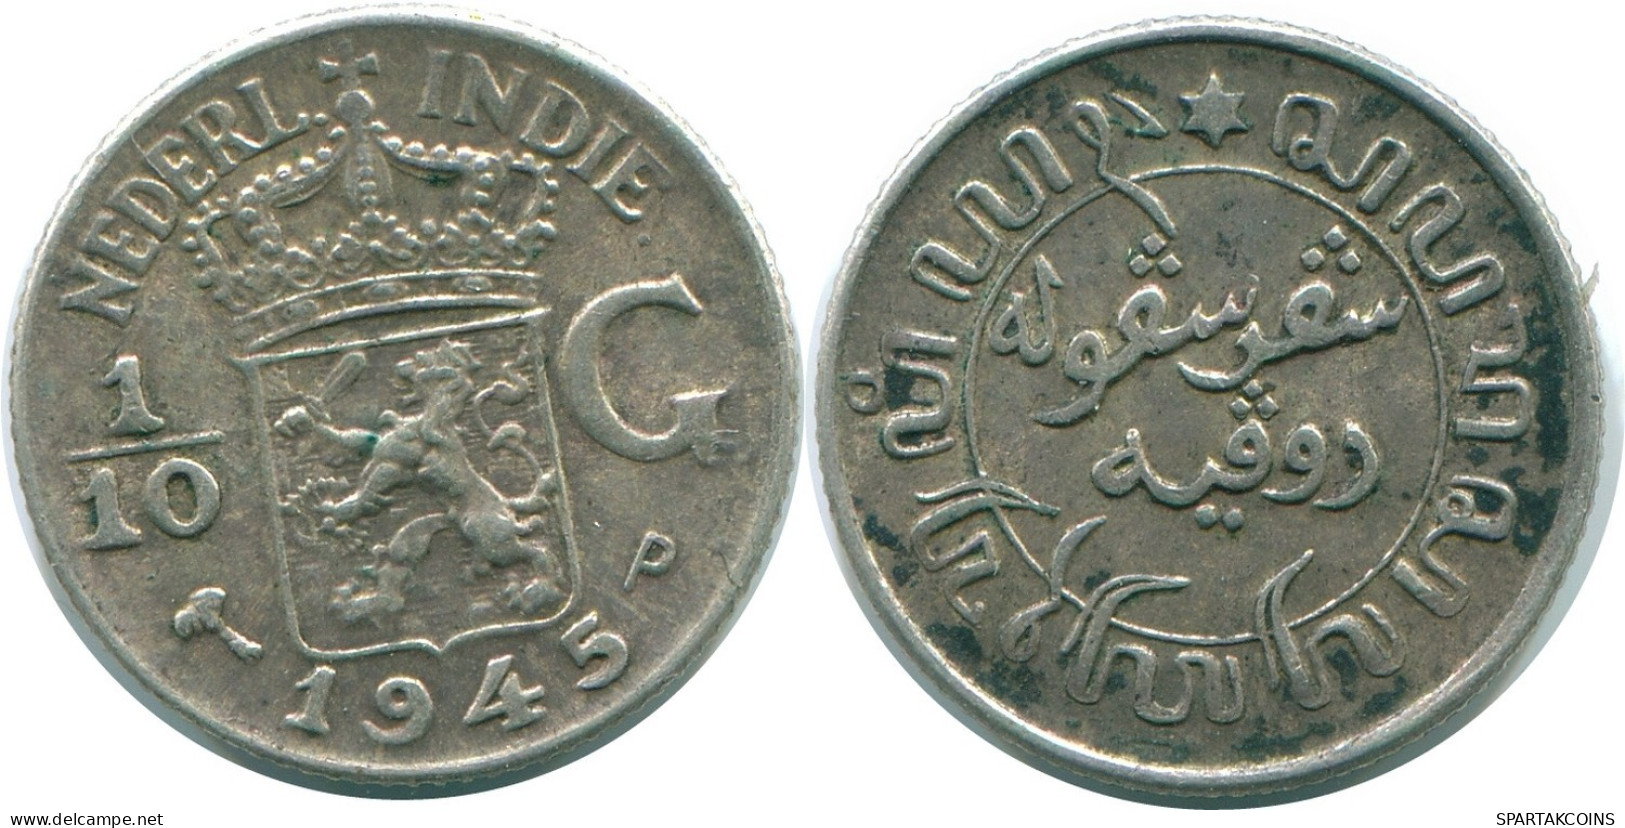 1/10 GULDEN 1945 P NETHERLANDS EAST INDIES SILVER Colonial Coin #NL14194.3.U.A - Indie Olandesi